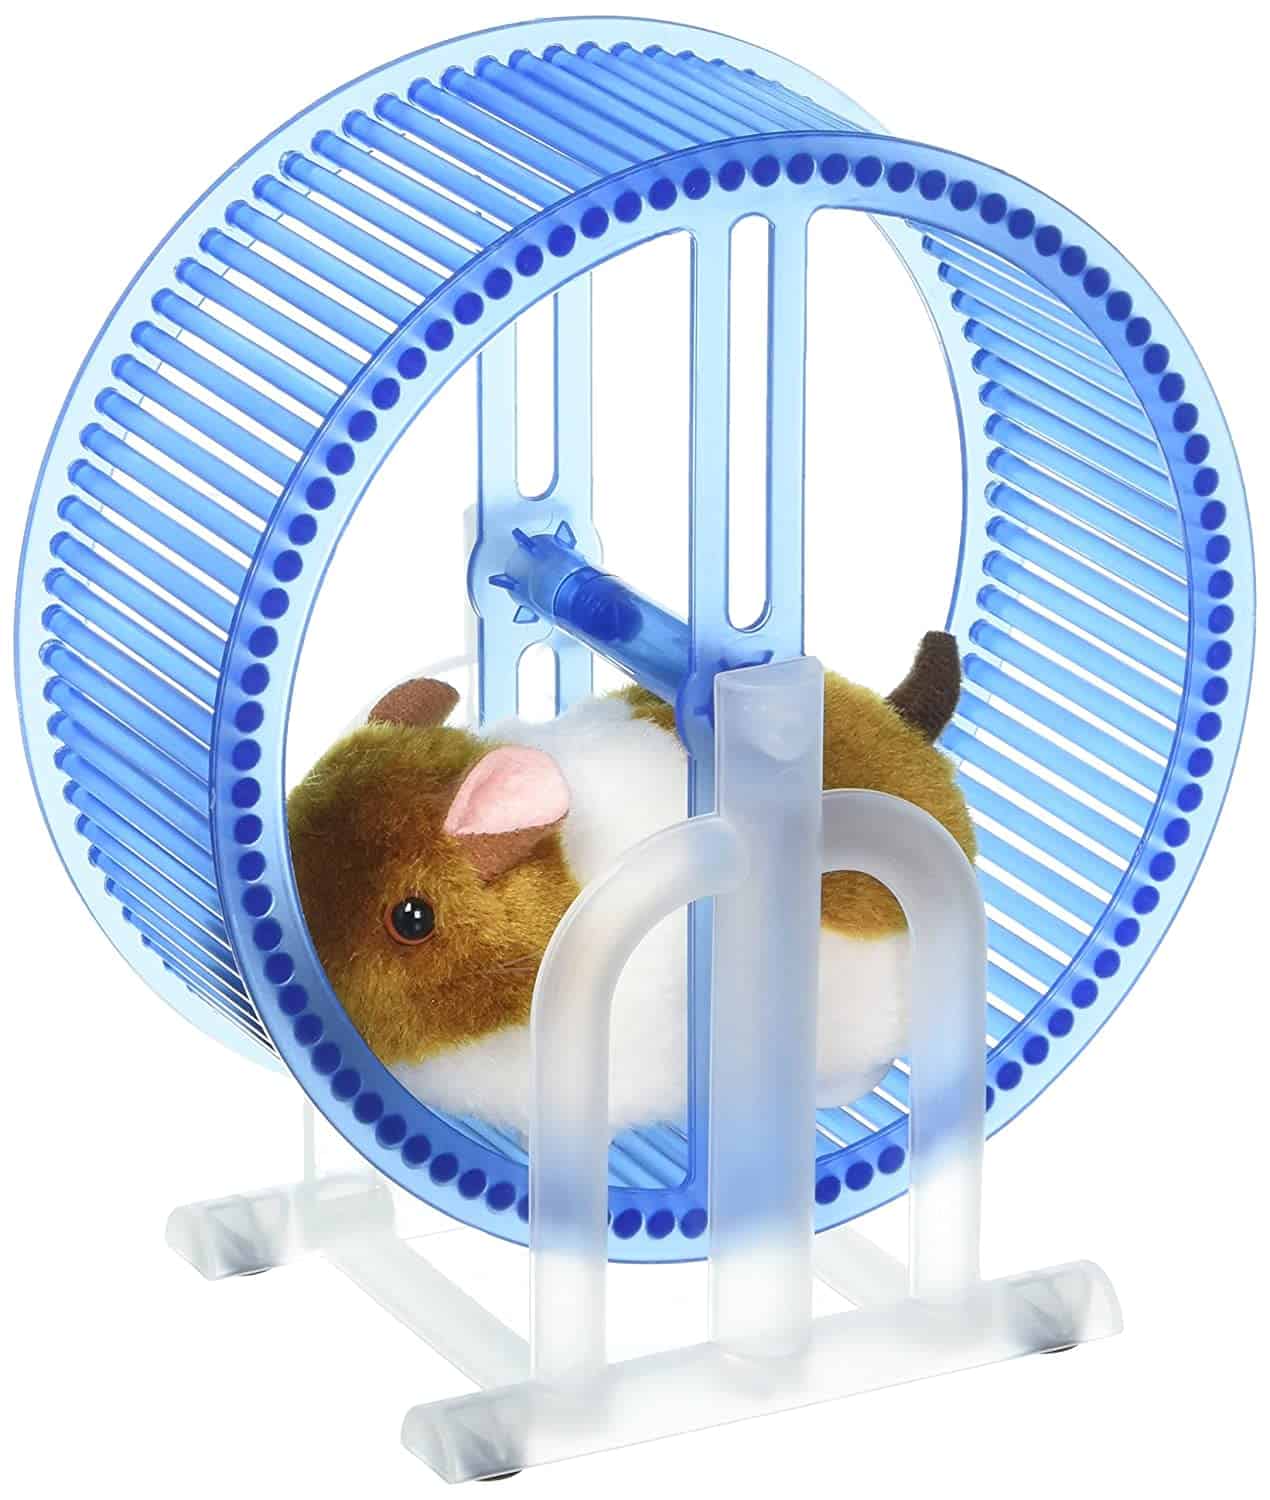 Why does your hamster run on the wheel?